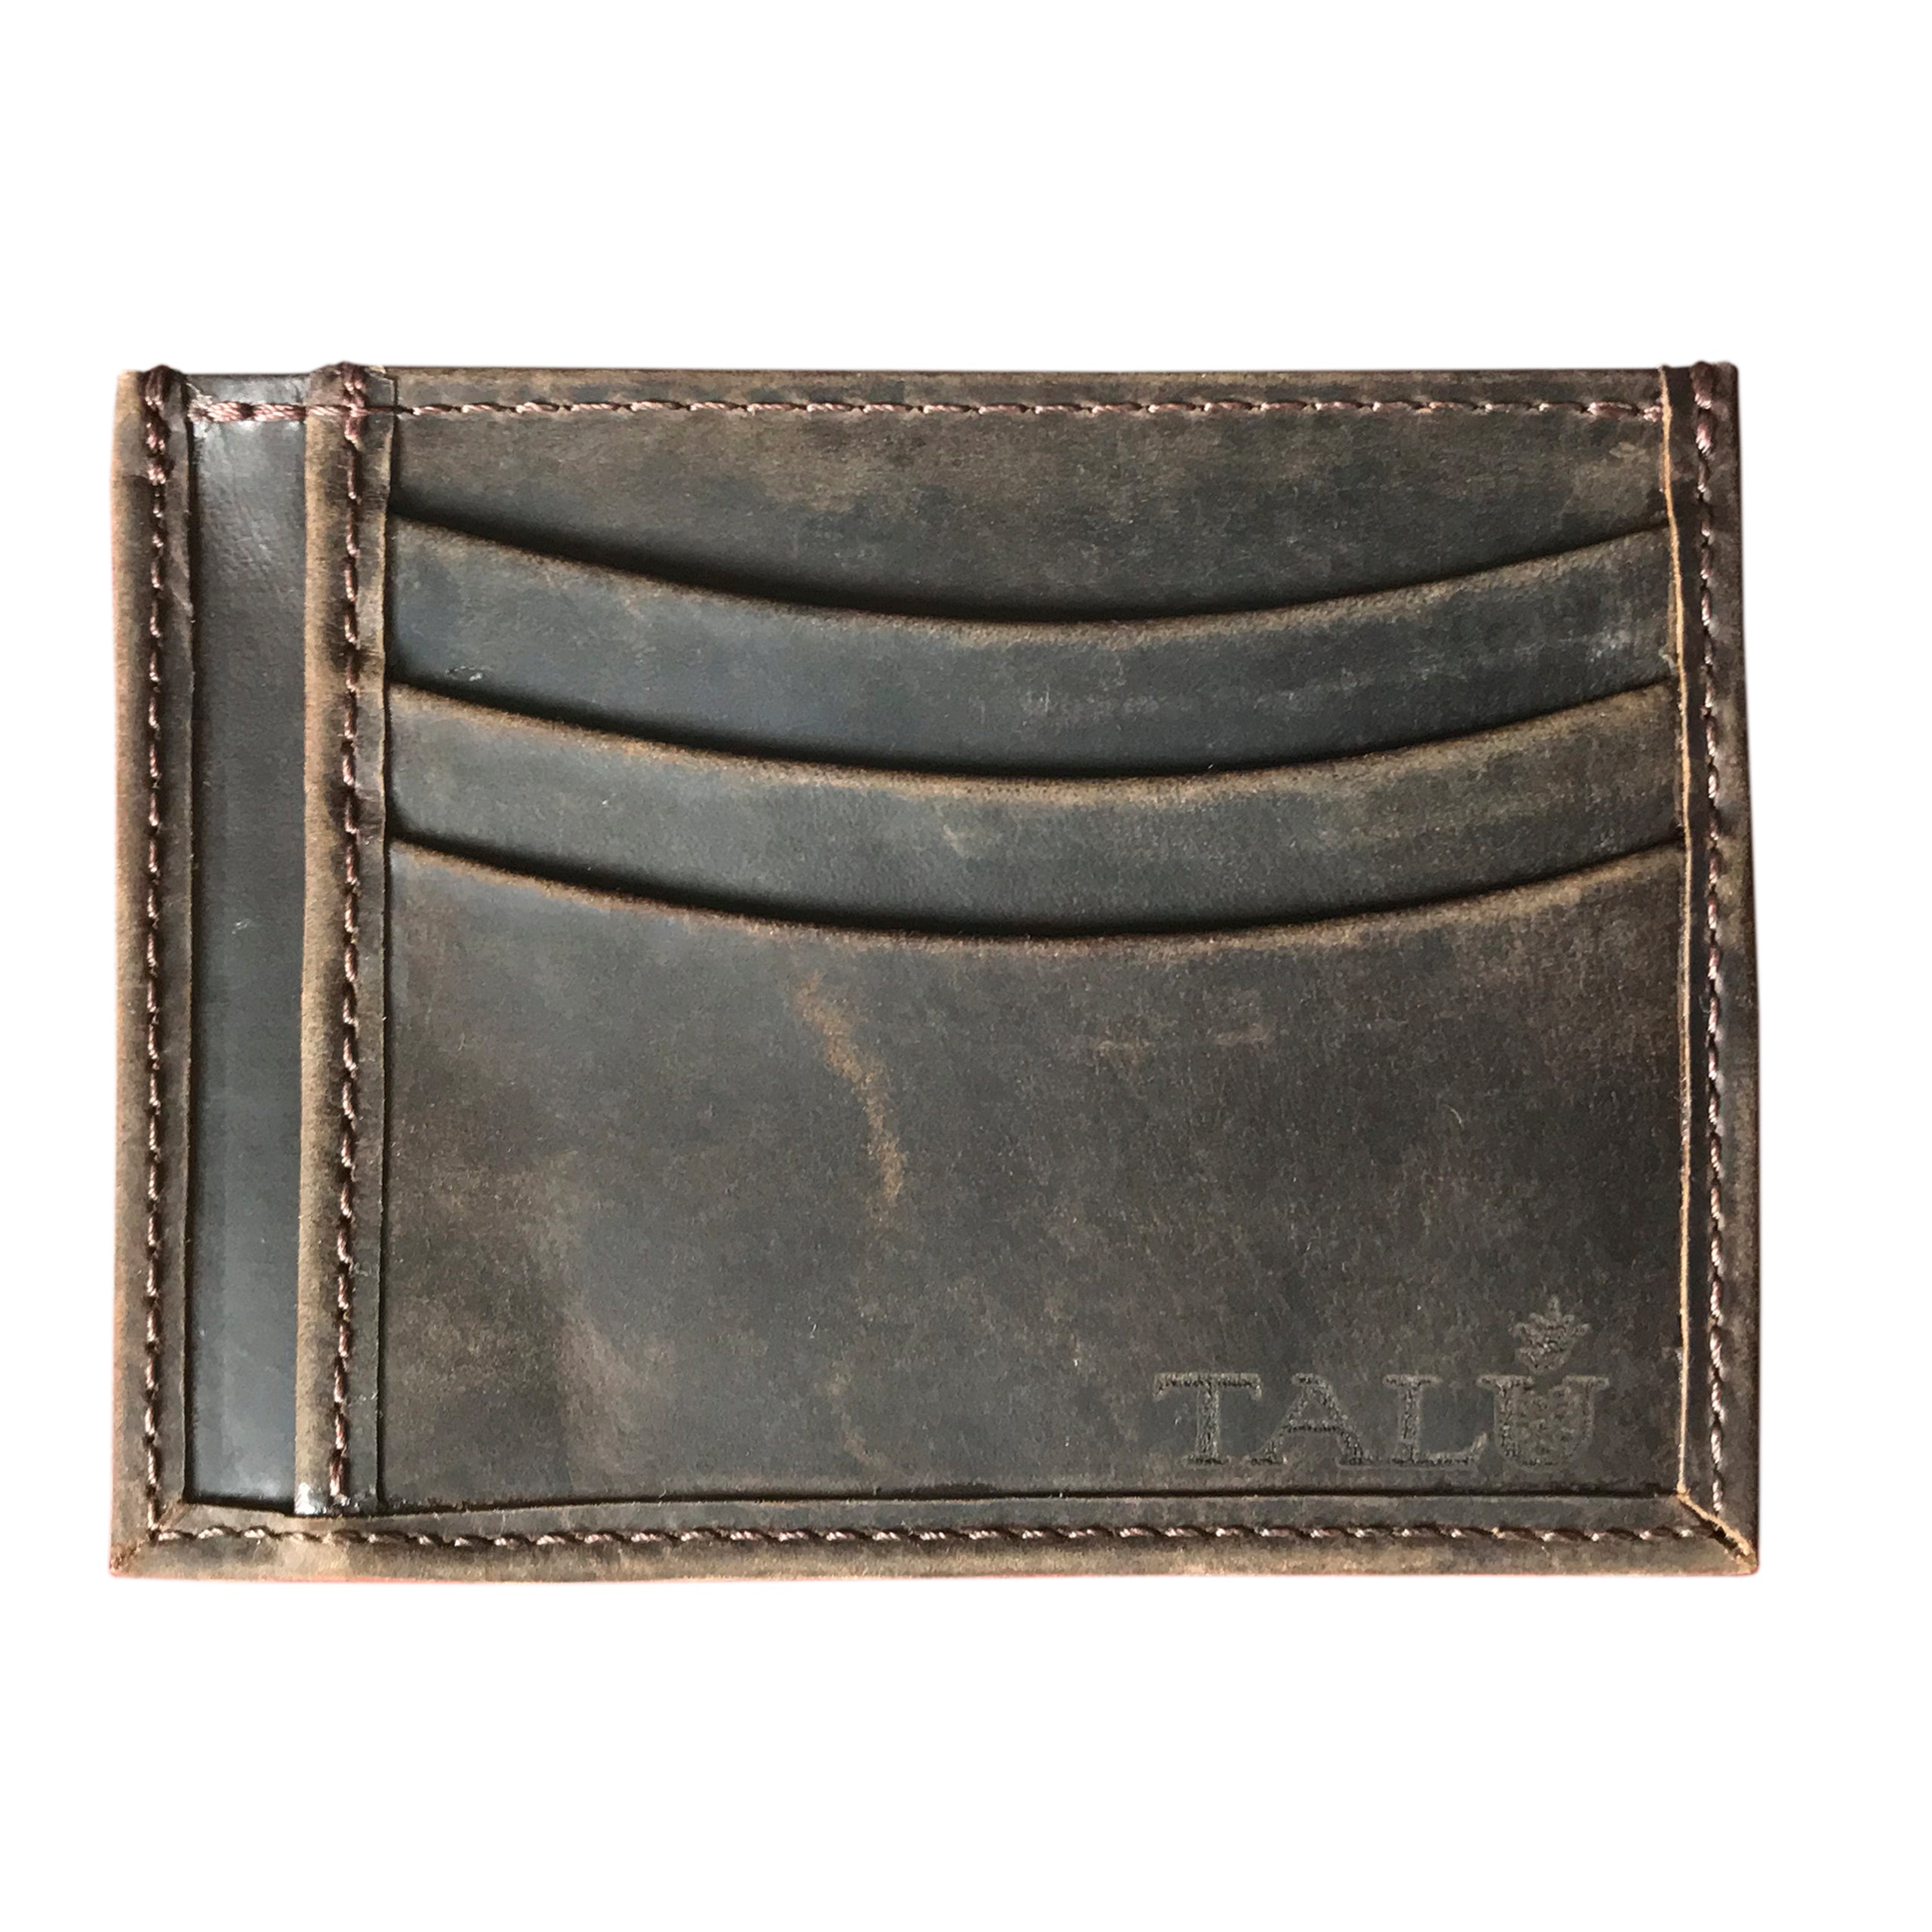 Book Style Cardholder - Genuine Leather